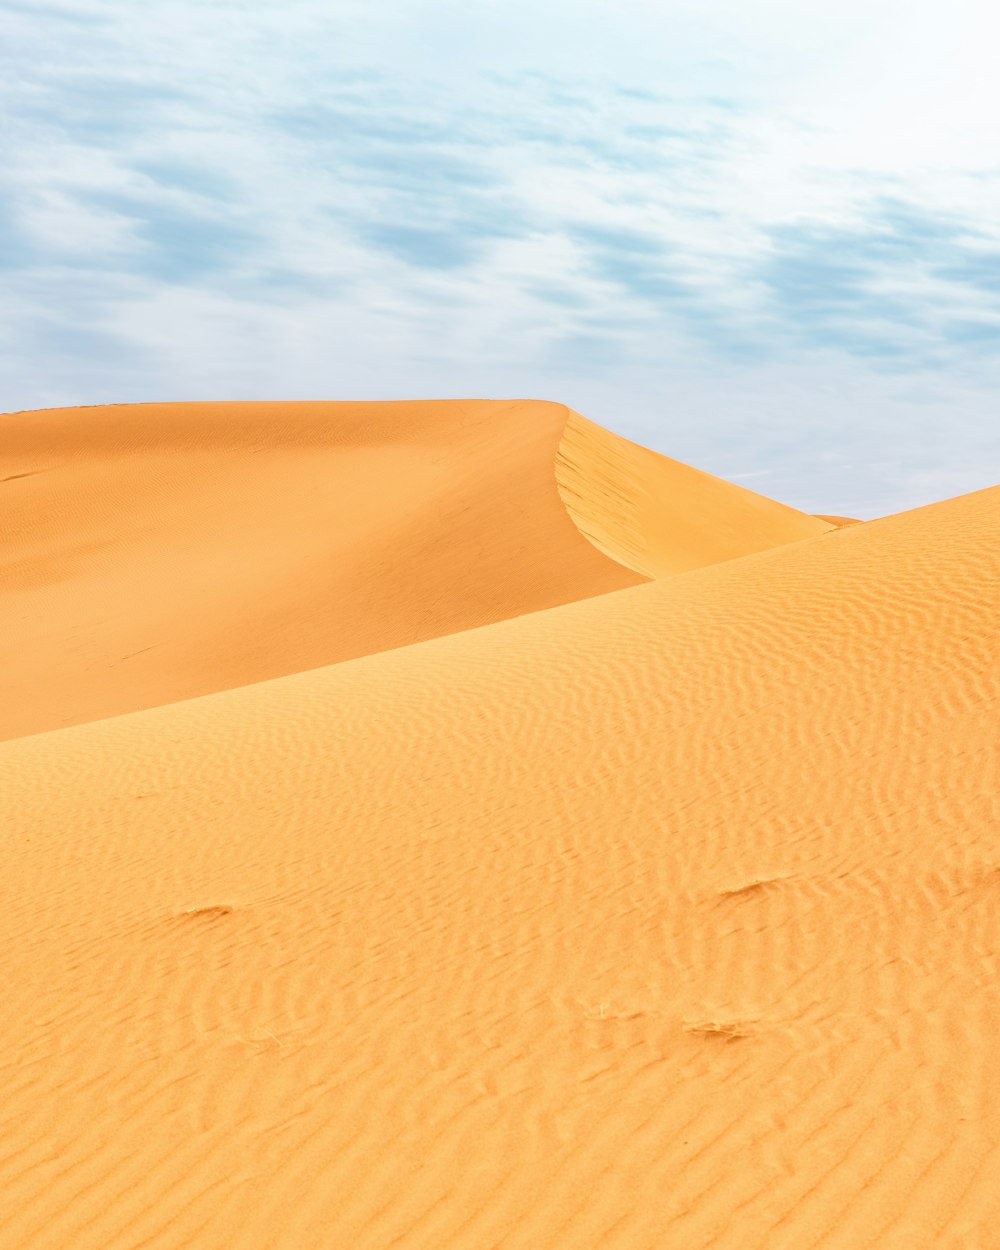 a person walking across a desert with footprints in the sand